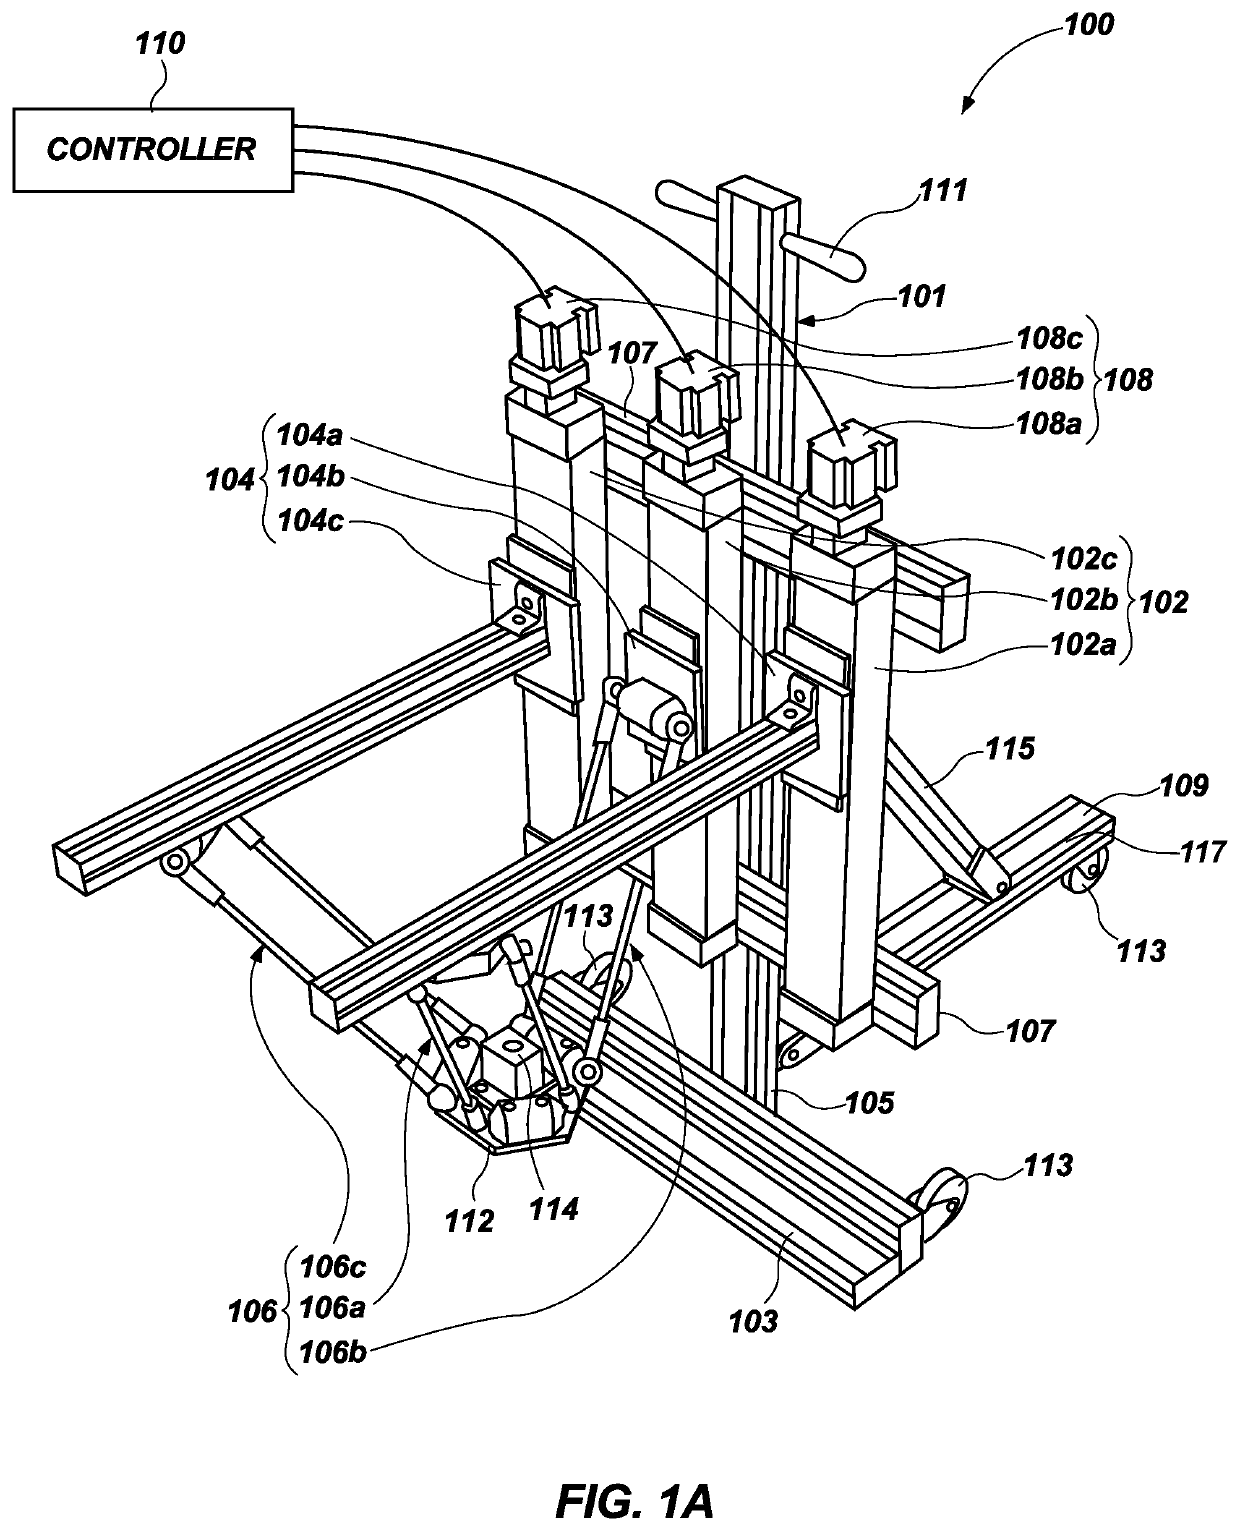 Linear delta systems, hexapod systems, and related methods